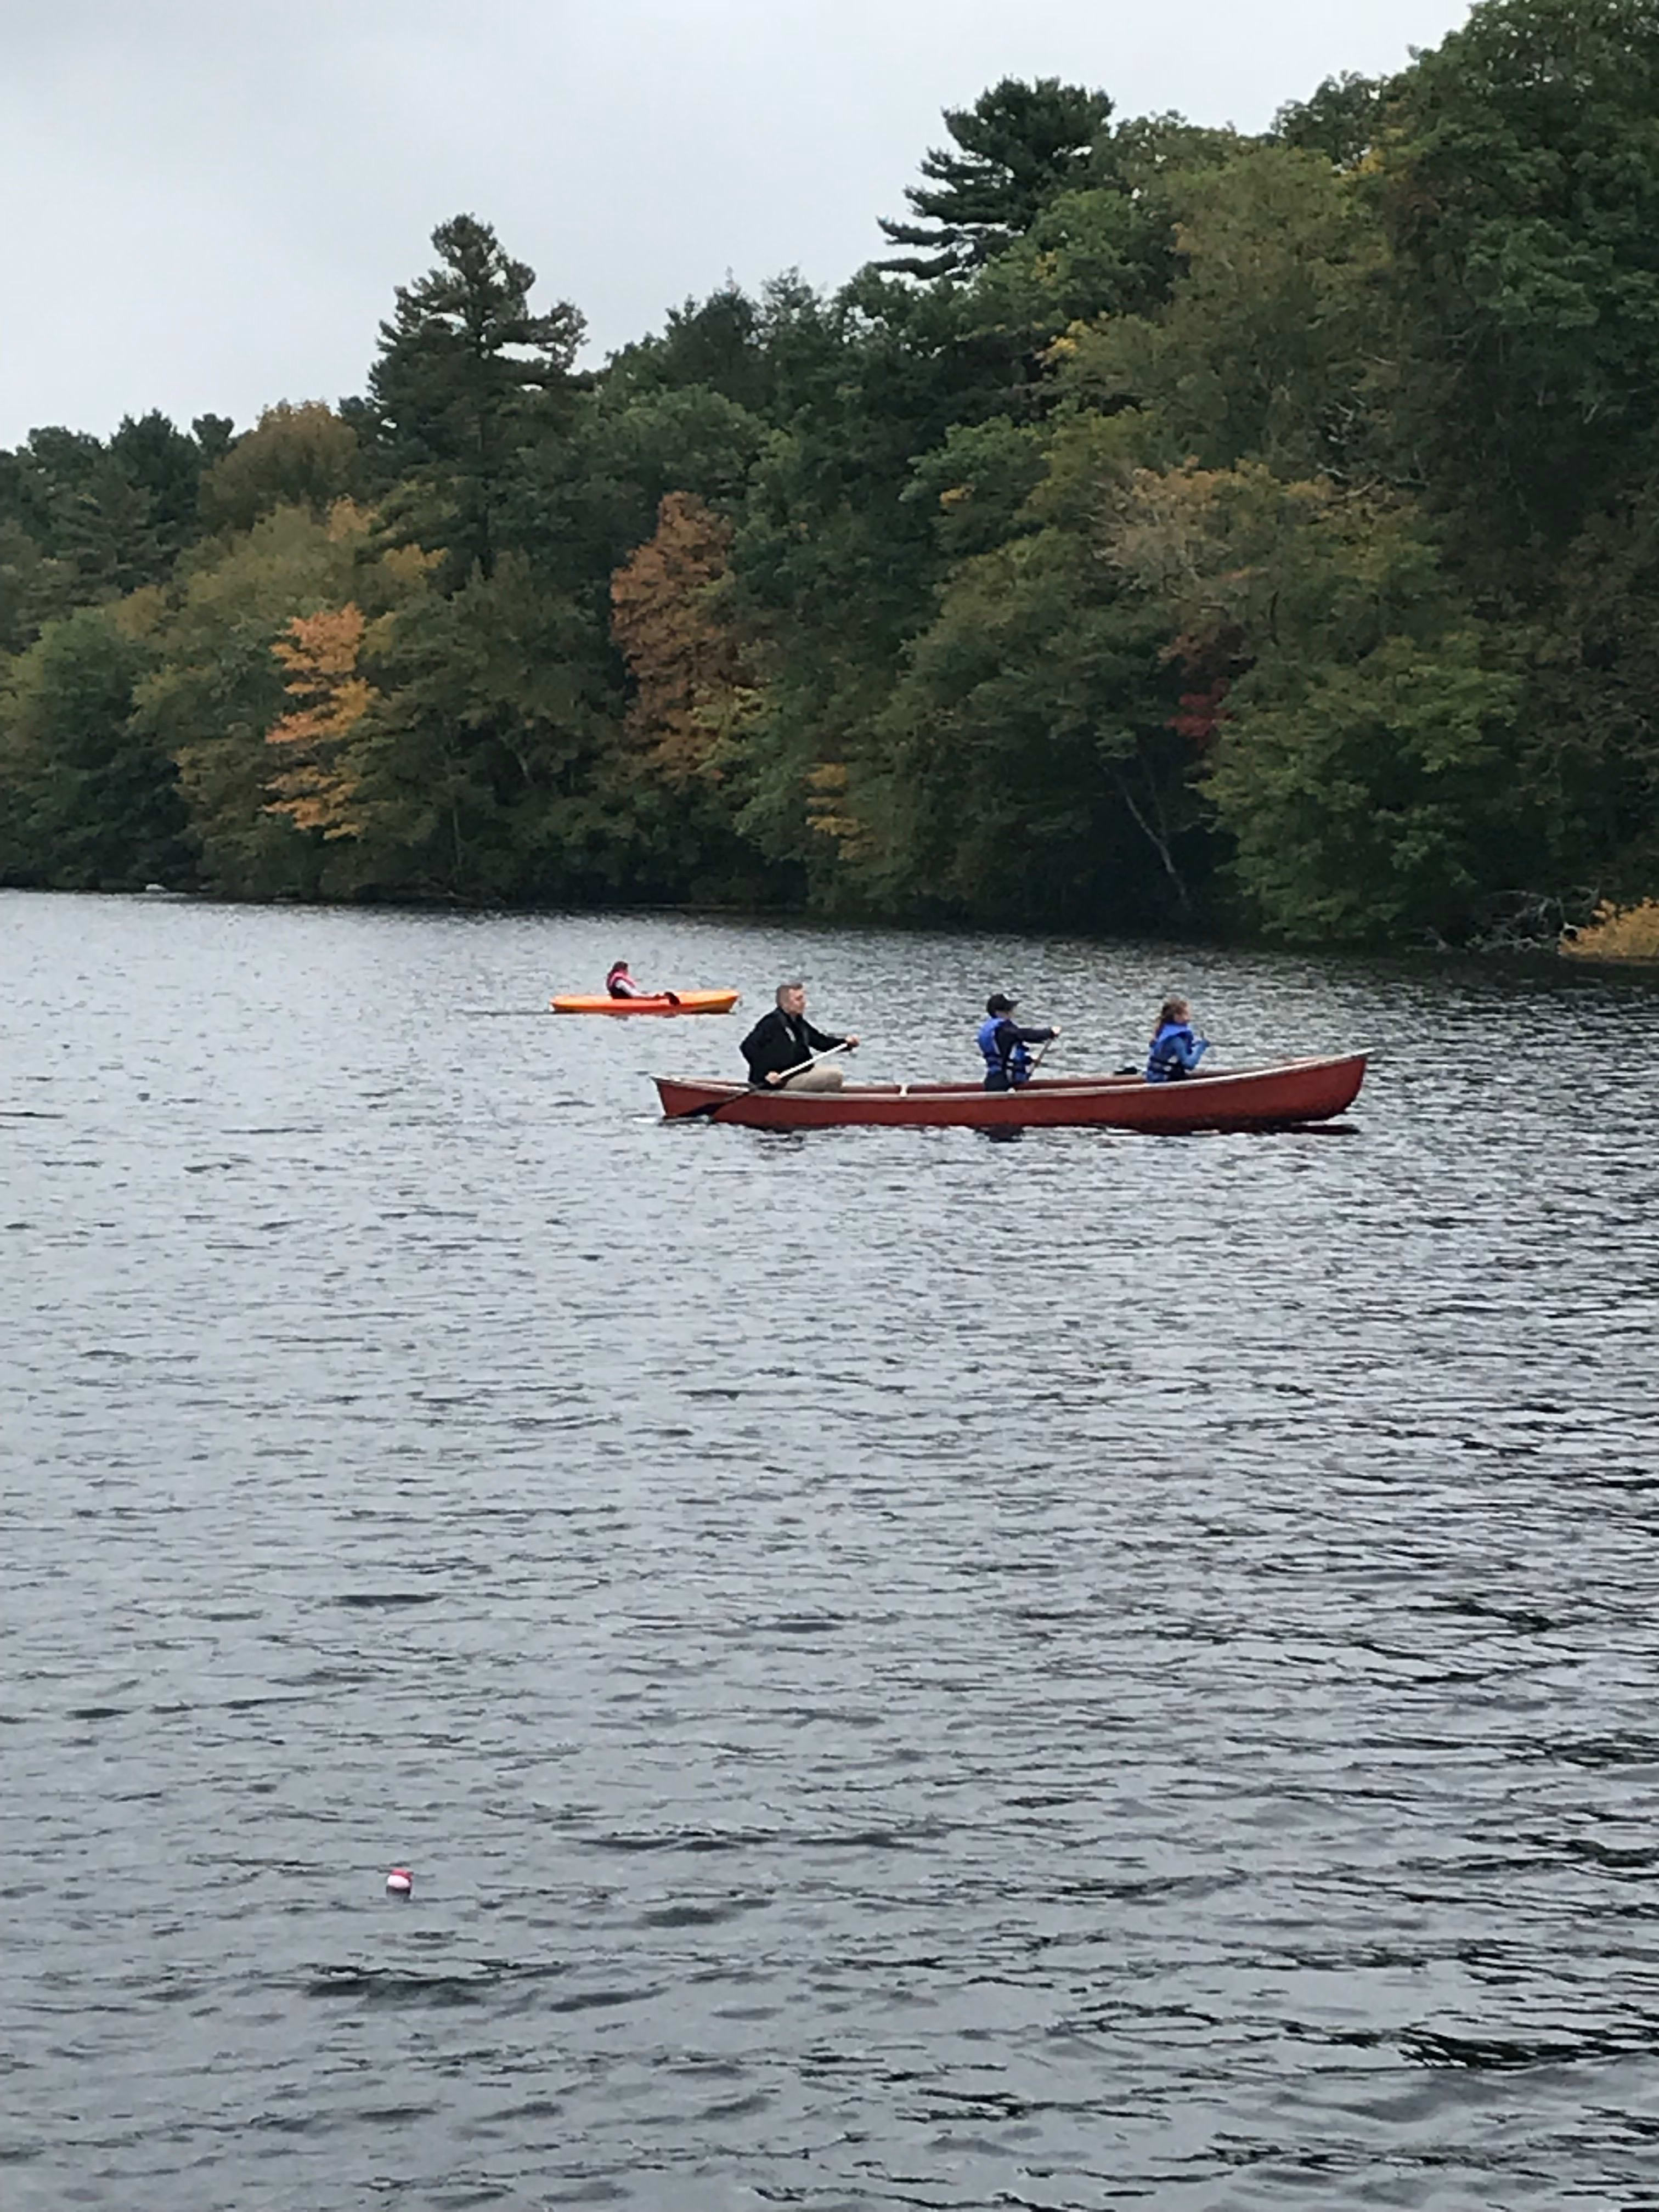 Our Lake - Beach Pond, Kayak rentals available 